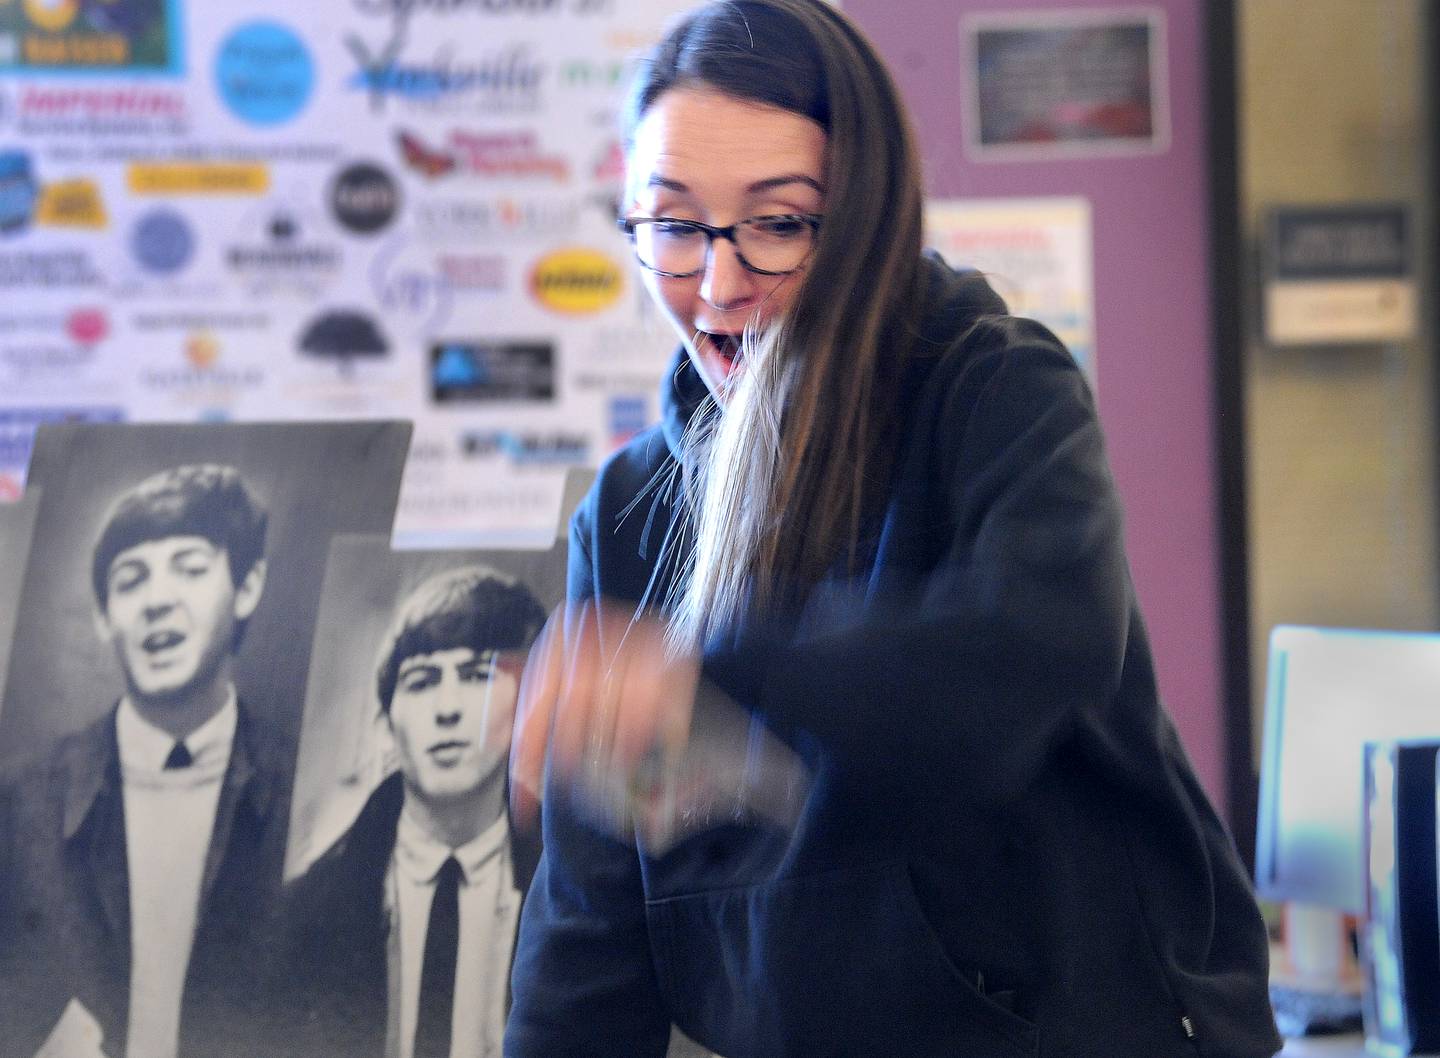 Darian Morel of Sandwich celebrates her putt into the cup during the Friends of the Yorkville Library's annual Mini Golf FUN Raiser on Sunday Feb. 5, 2023.